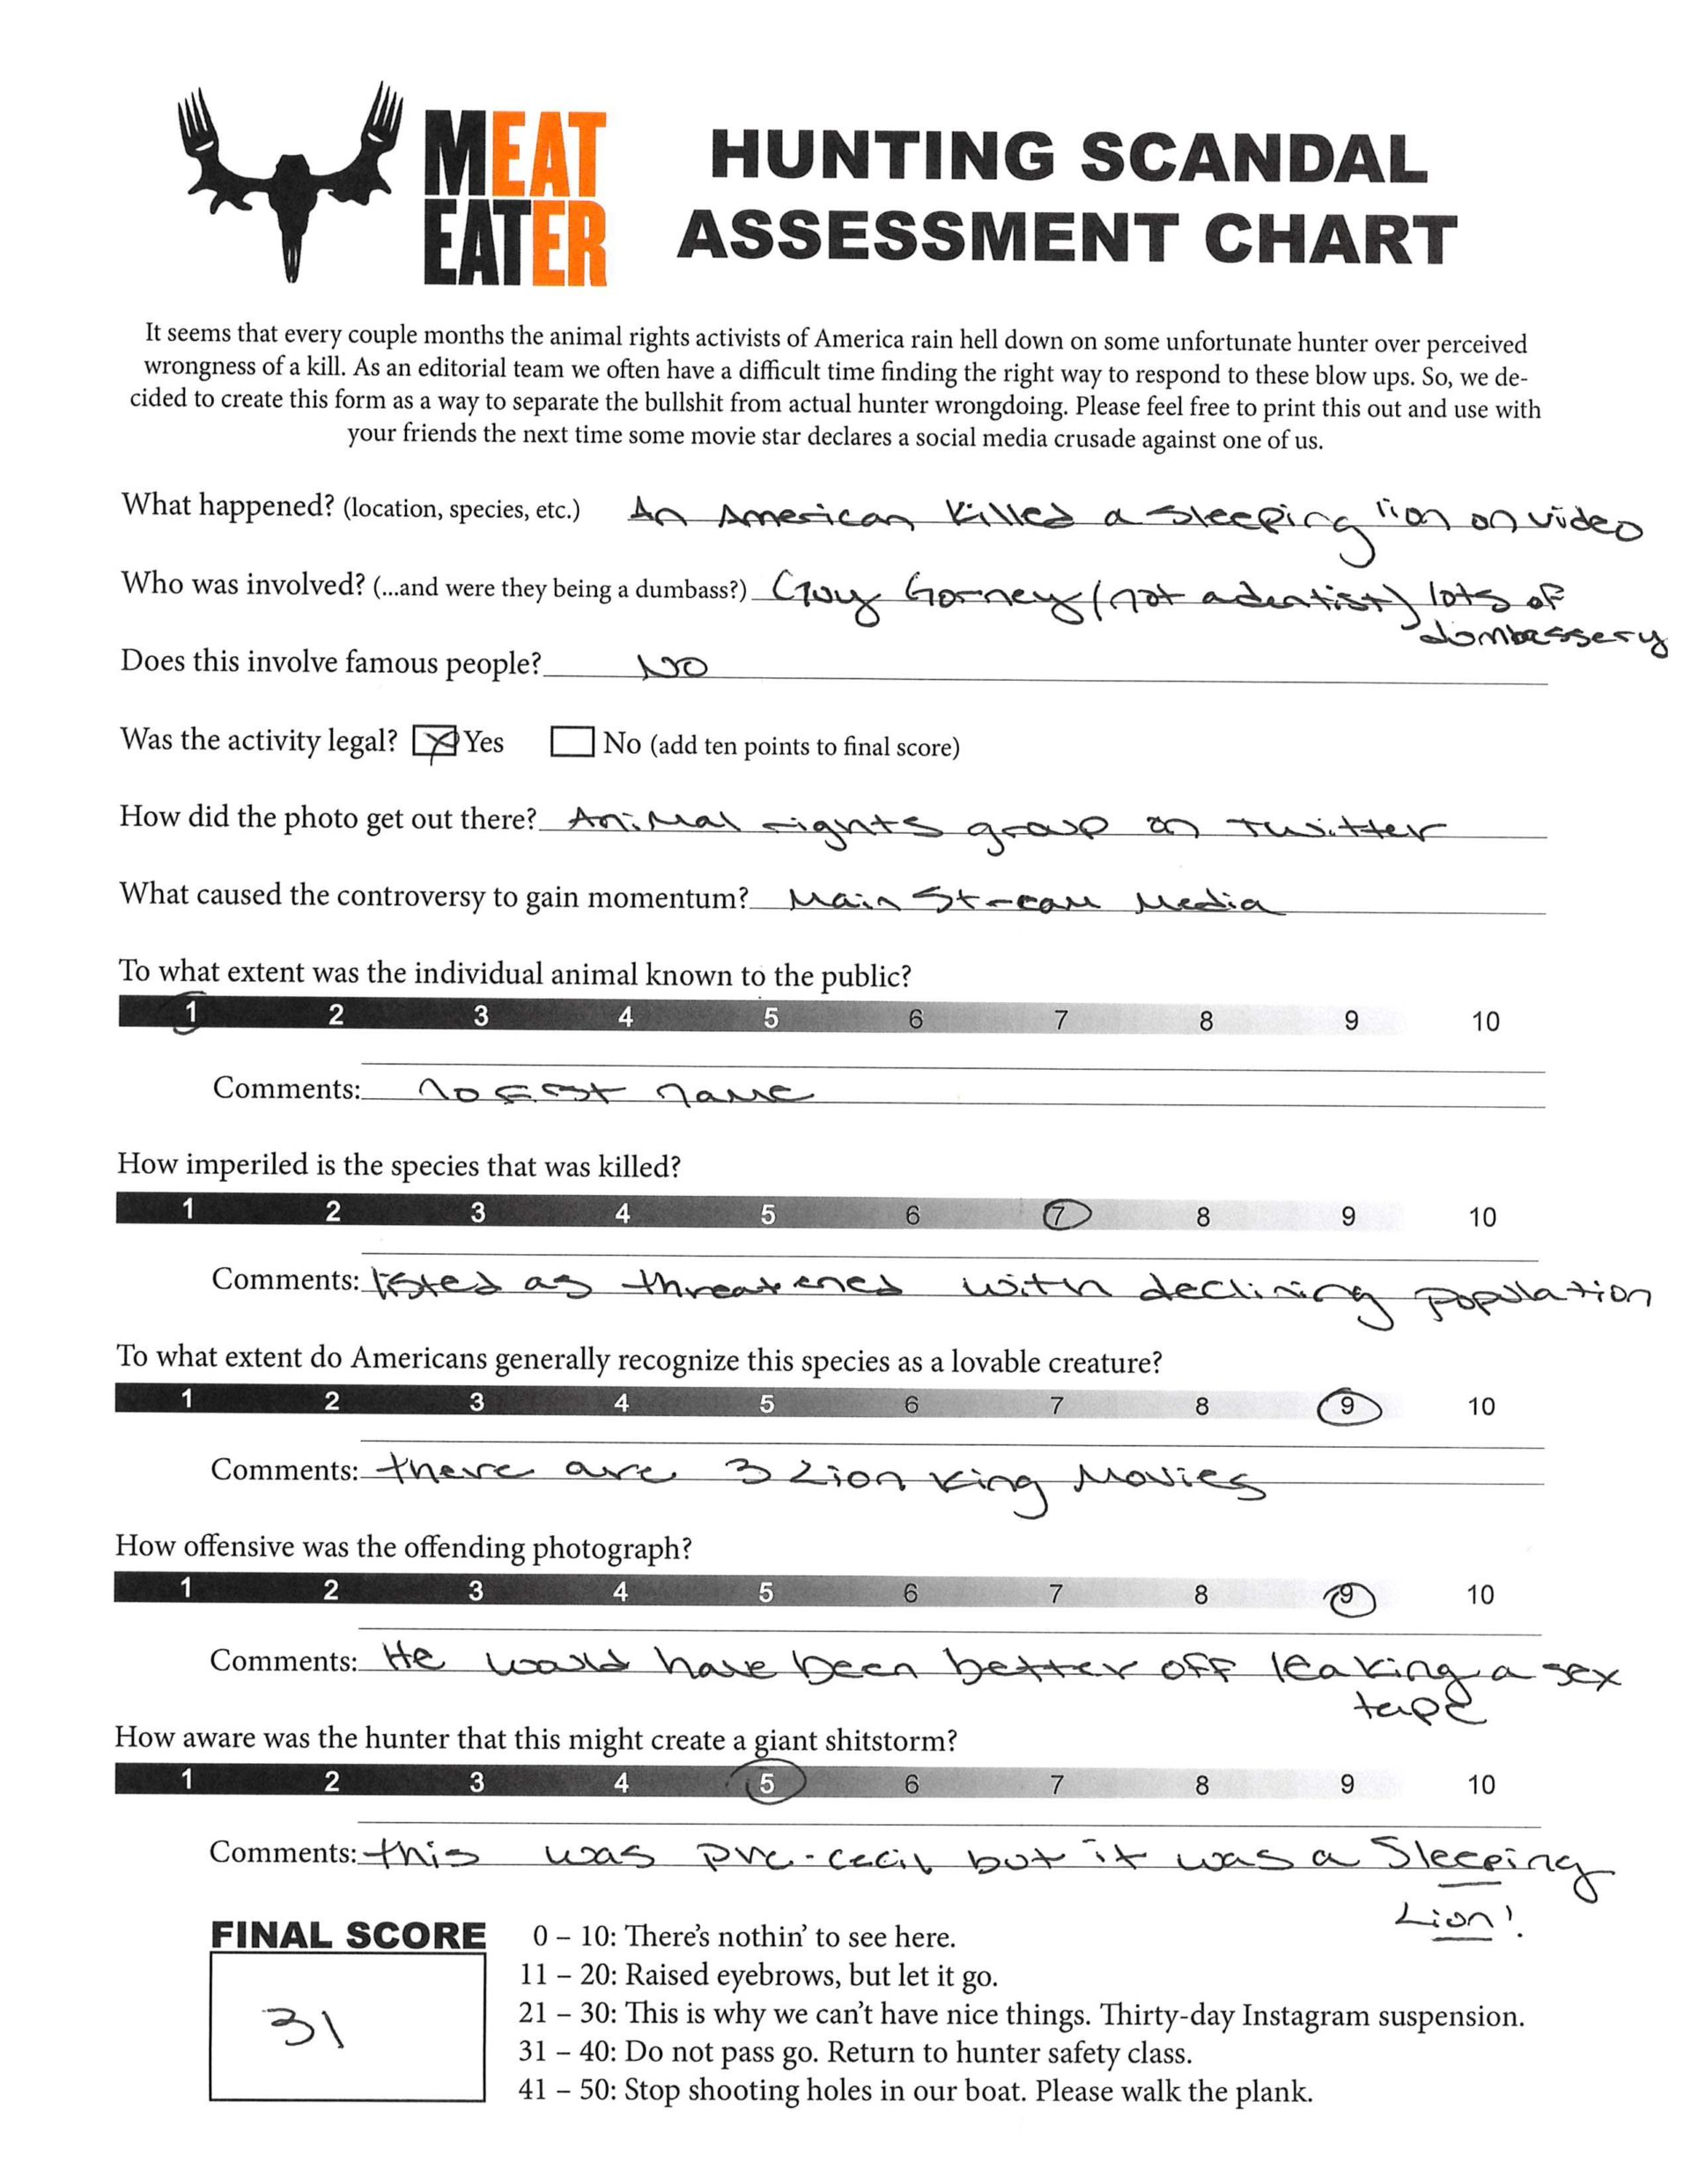 This hunting scandal assessment document goes line by line judging the depth of the sleeping lion shooter scandal. 